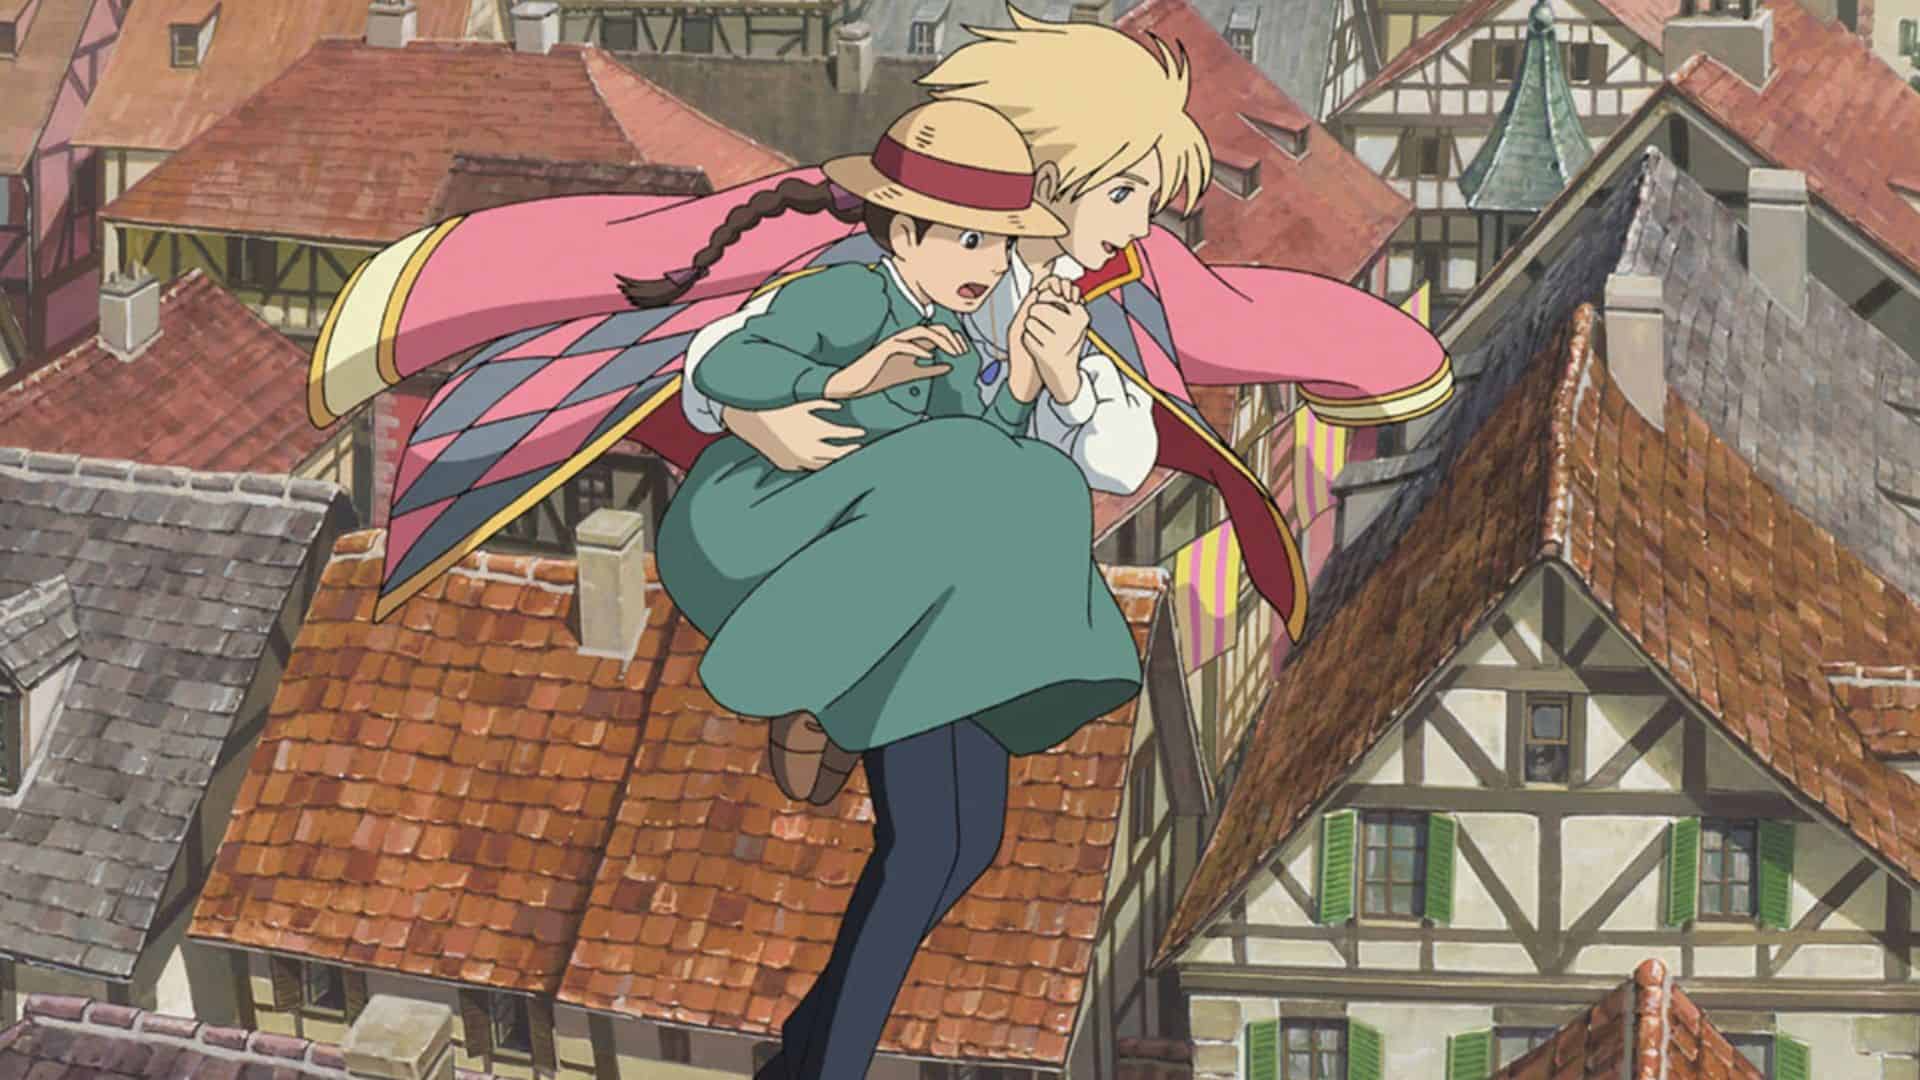 Howl carries Sophie as they fly above town in this image from Studio Ghibli